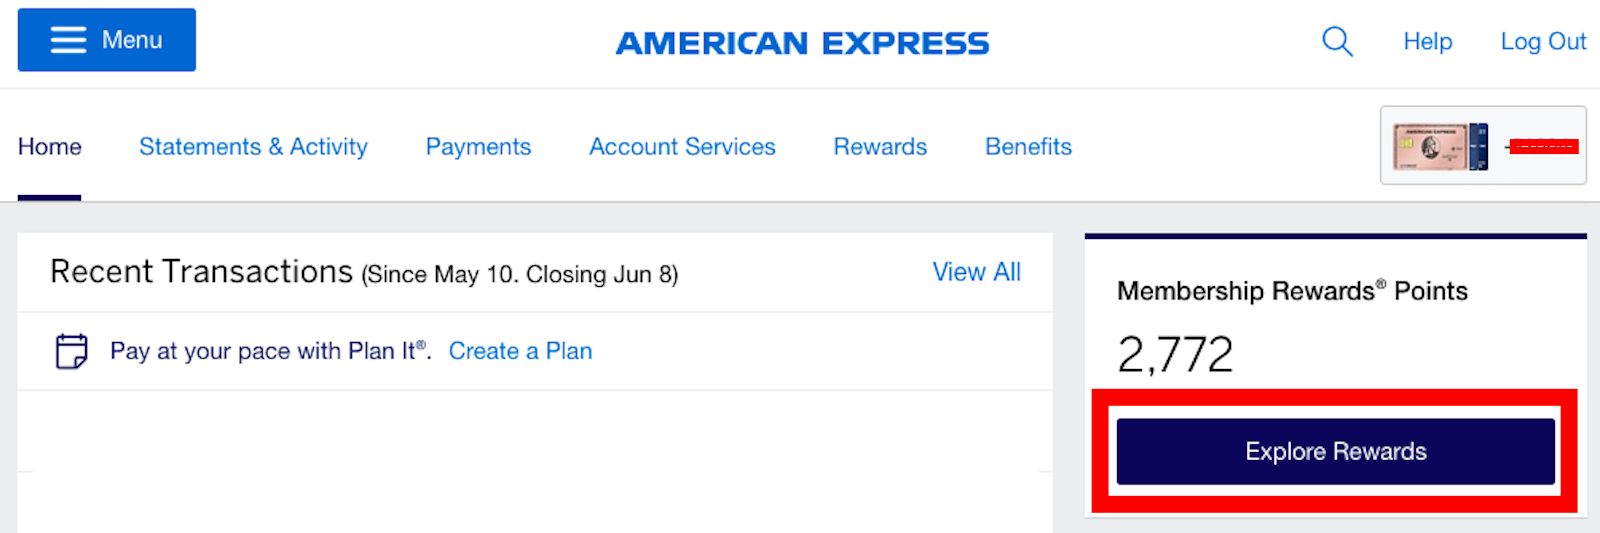 How To Transfer Points: Chase, Citi & American Express "How To" Guide